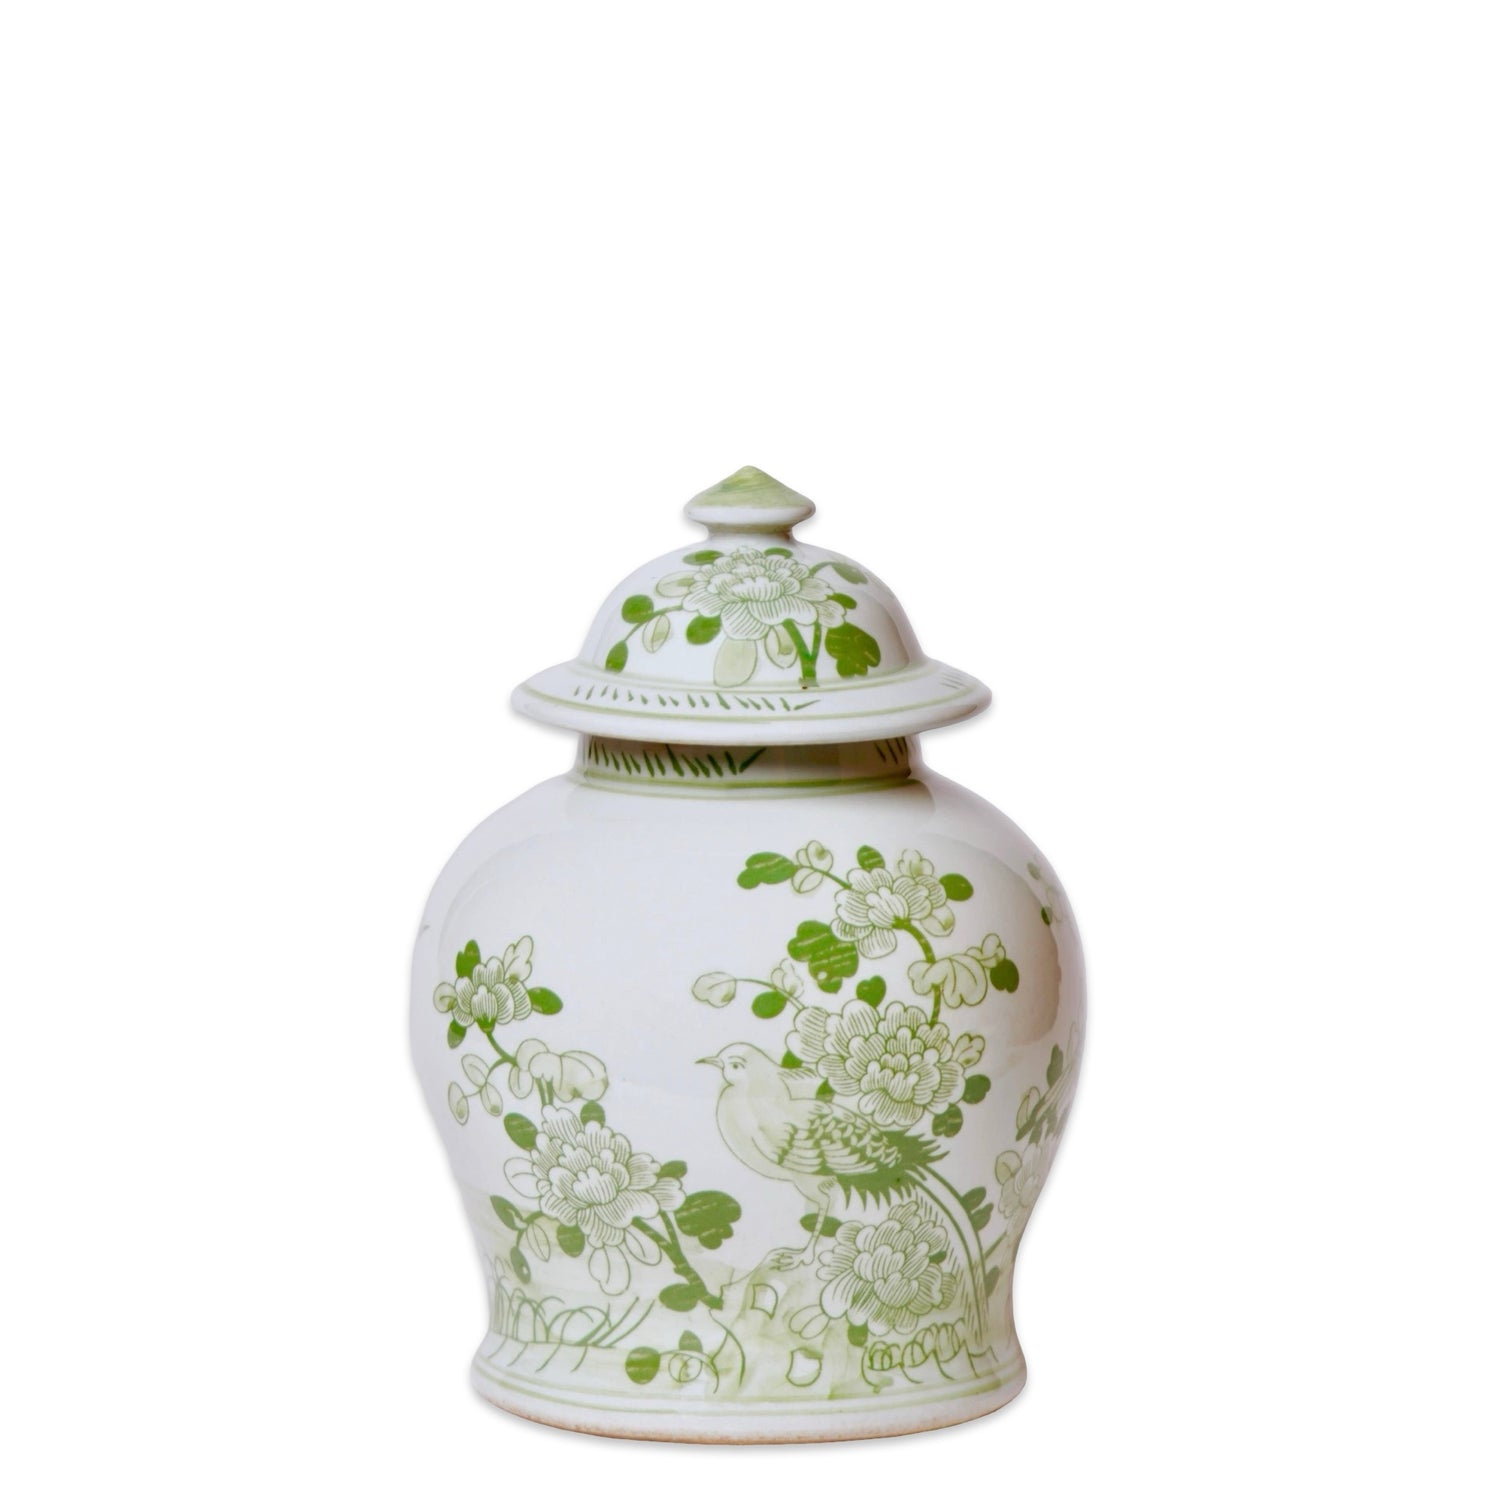 Green and White Porcelain Bird and Flower Temple Jar